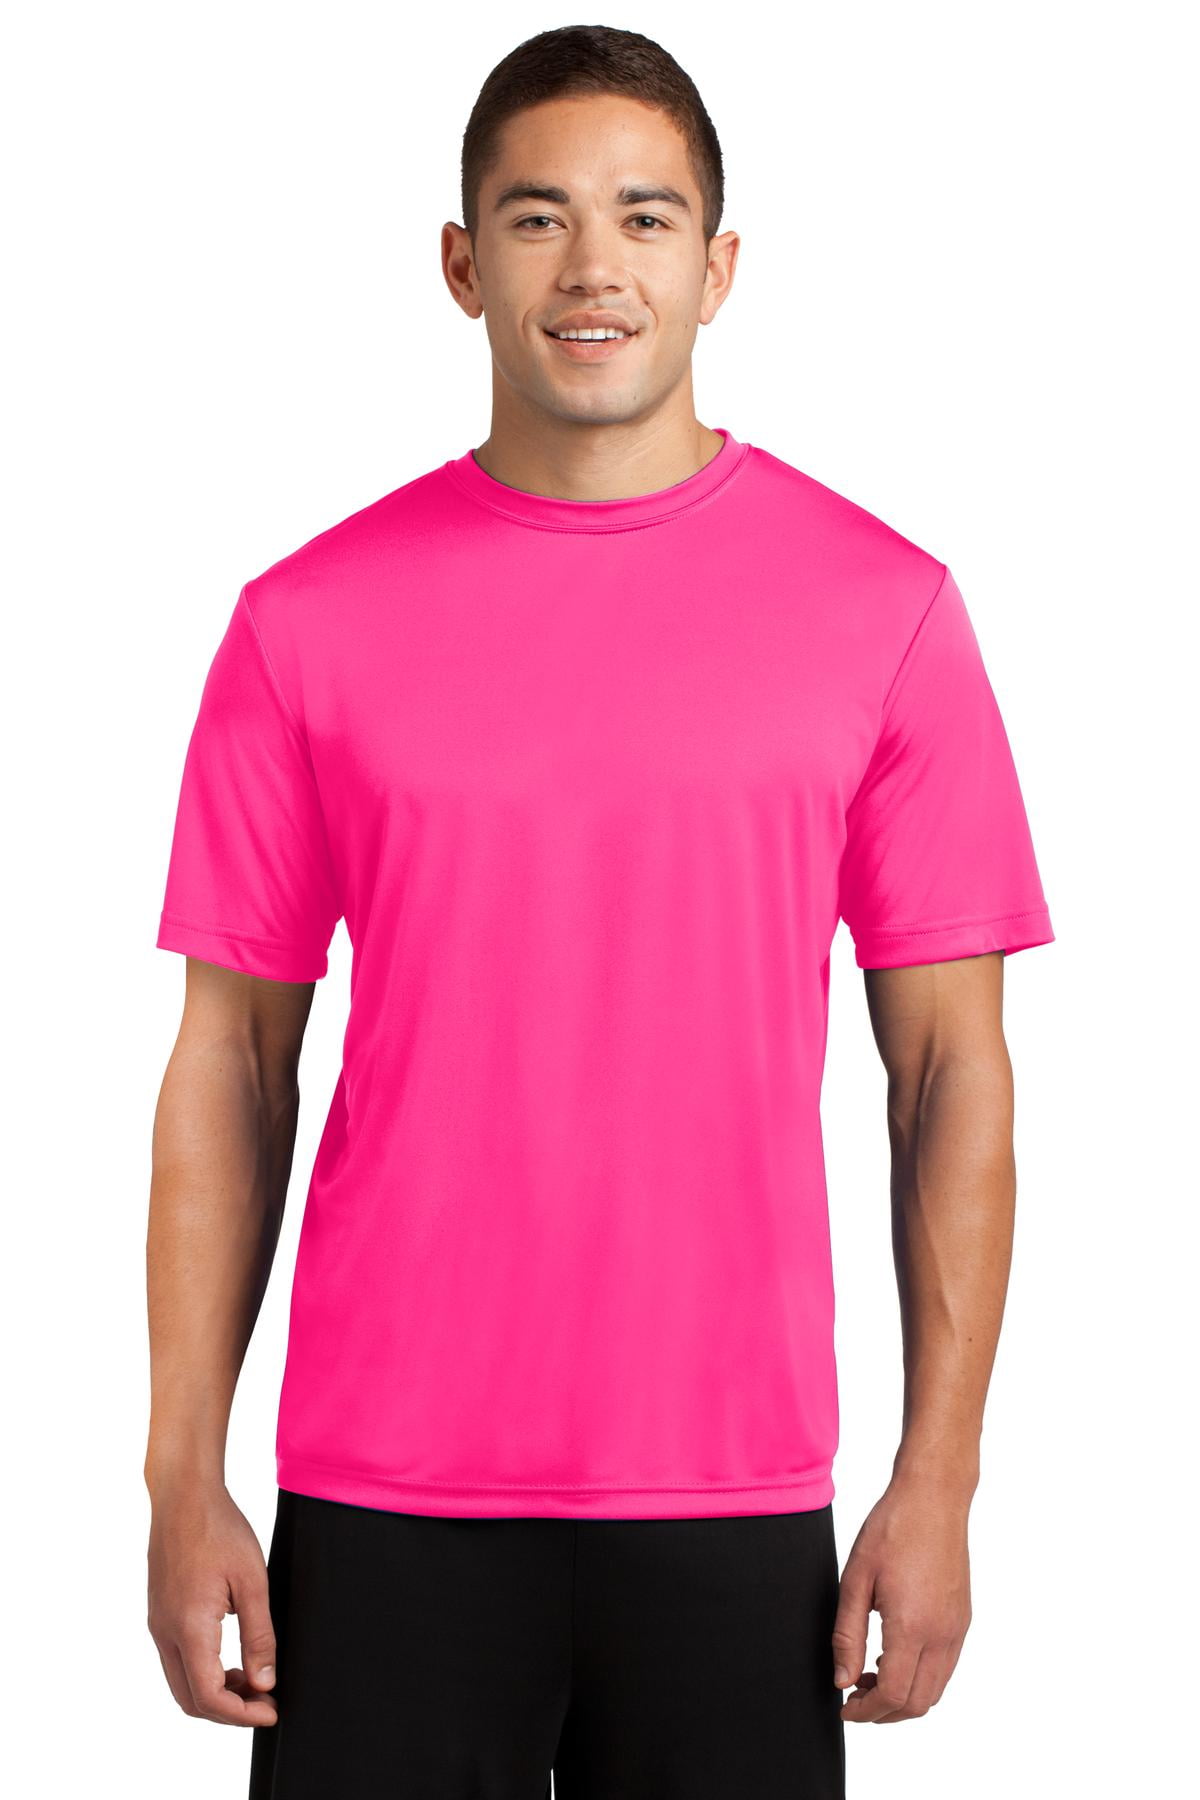 - Sport-Tek St350 Tee Pink Competitor Posicharge - Neon L